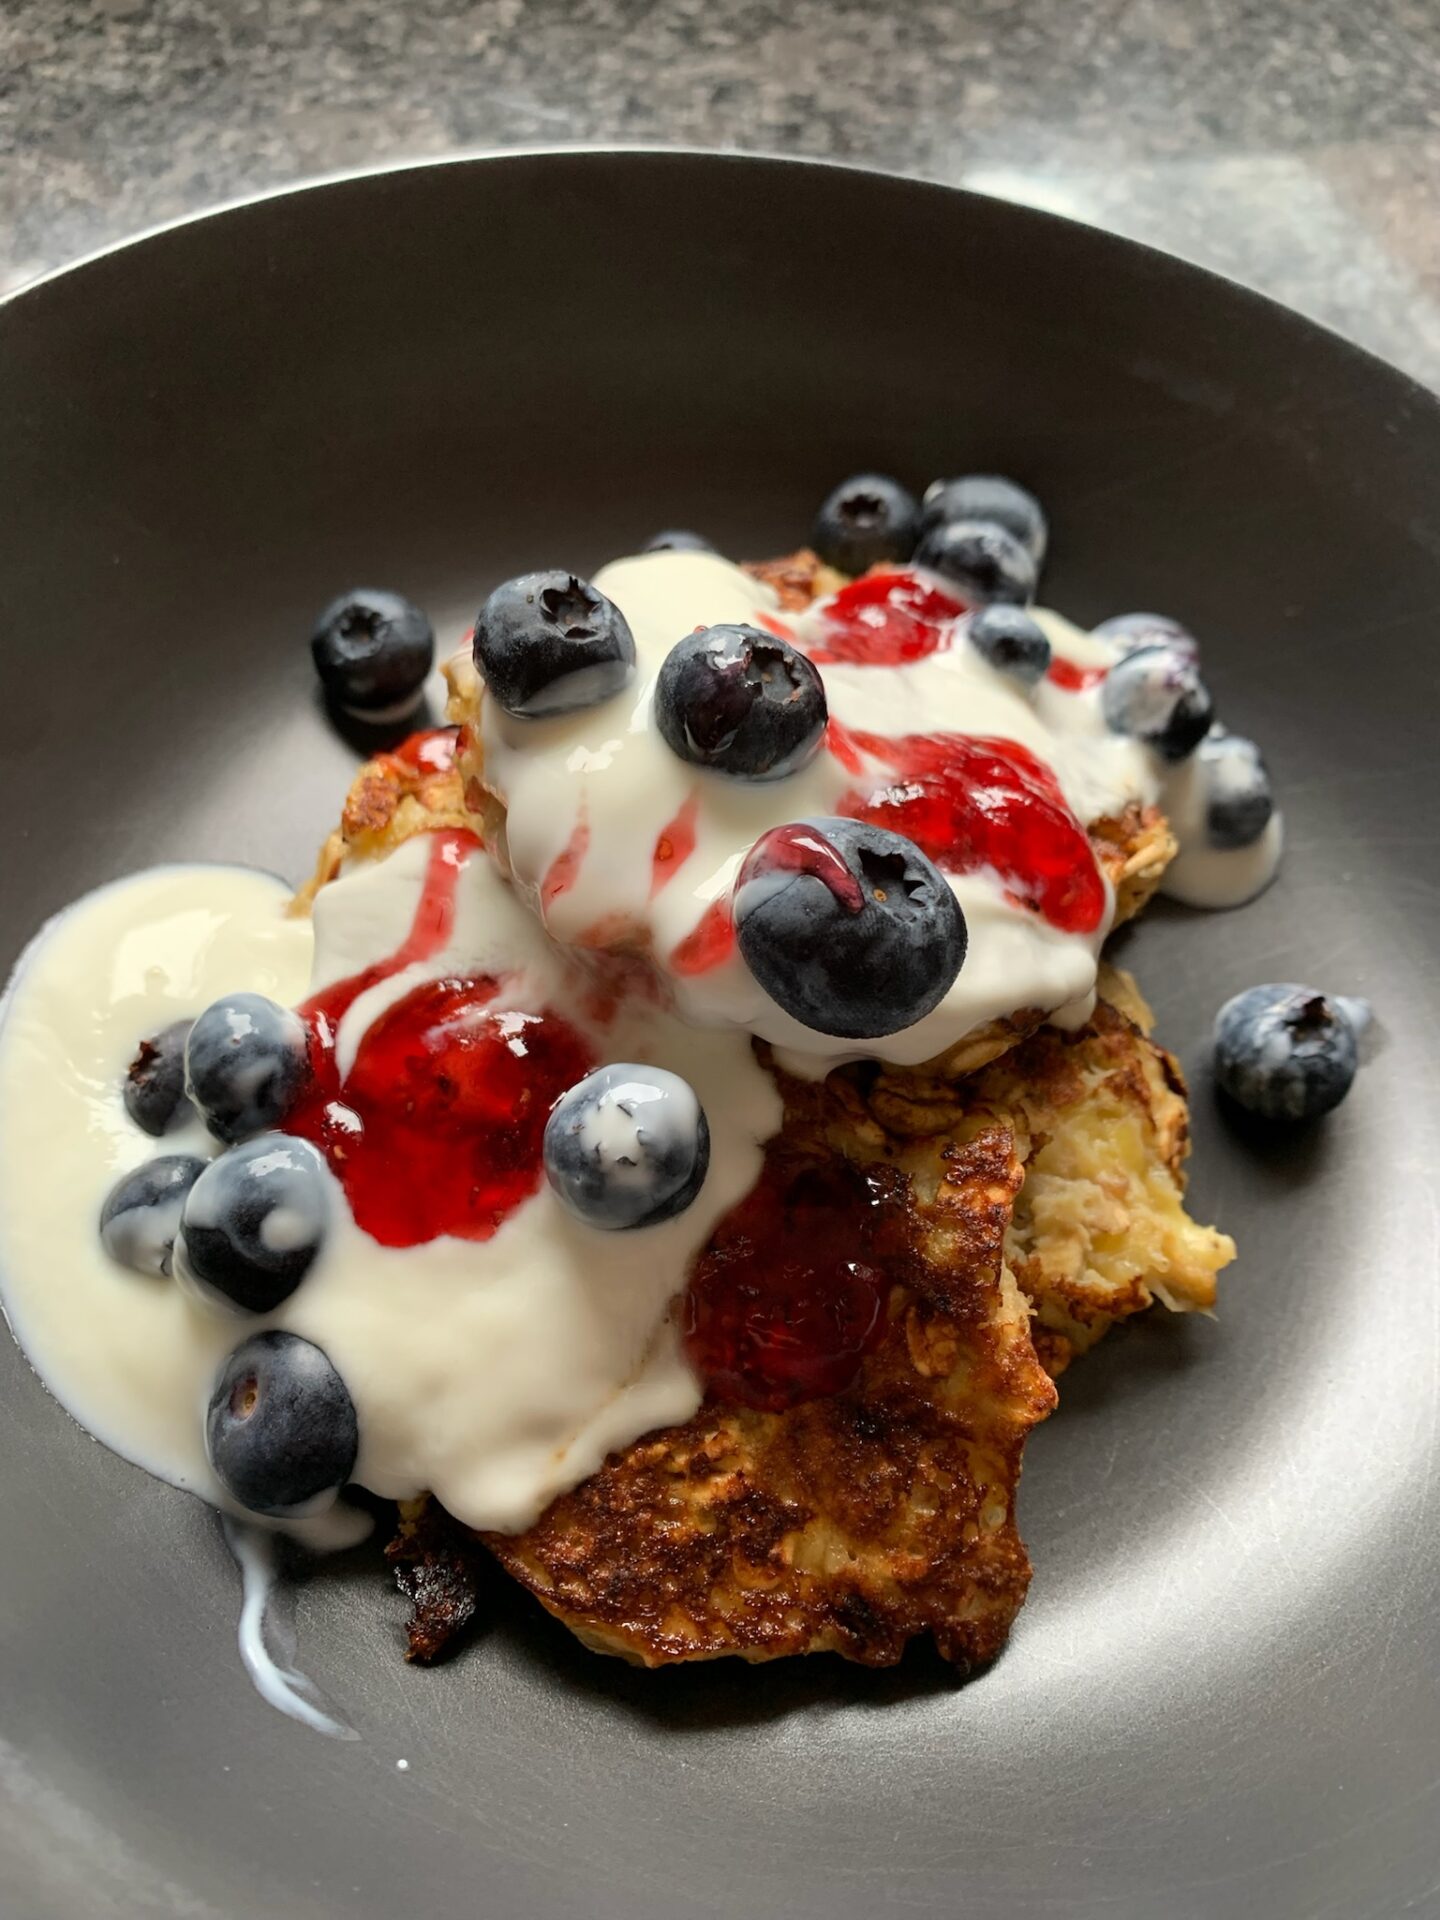 Banana and oat hotcakes with greek yoghurt, berries and raspberry jam drizzled over the top